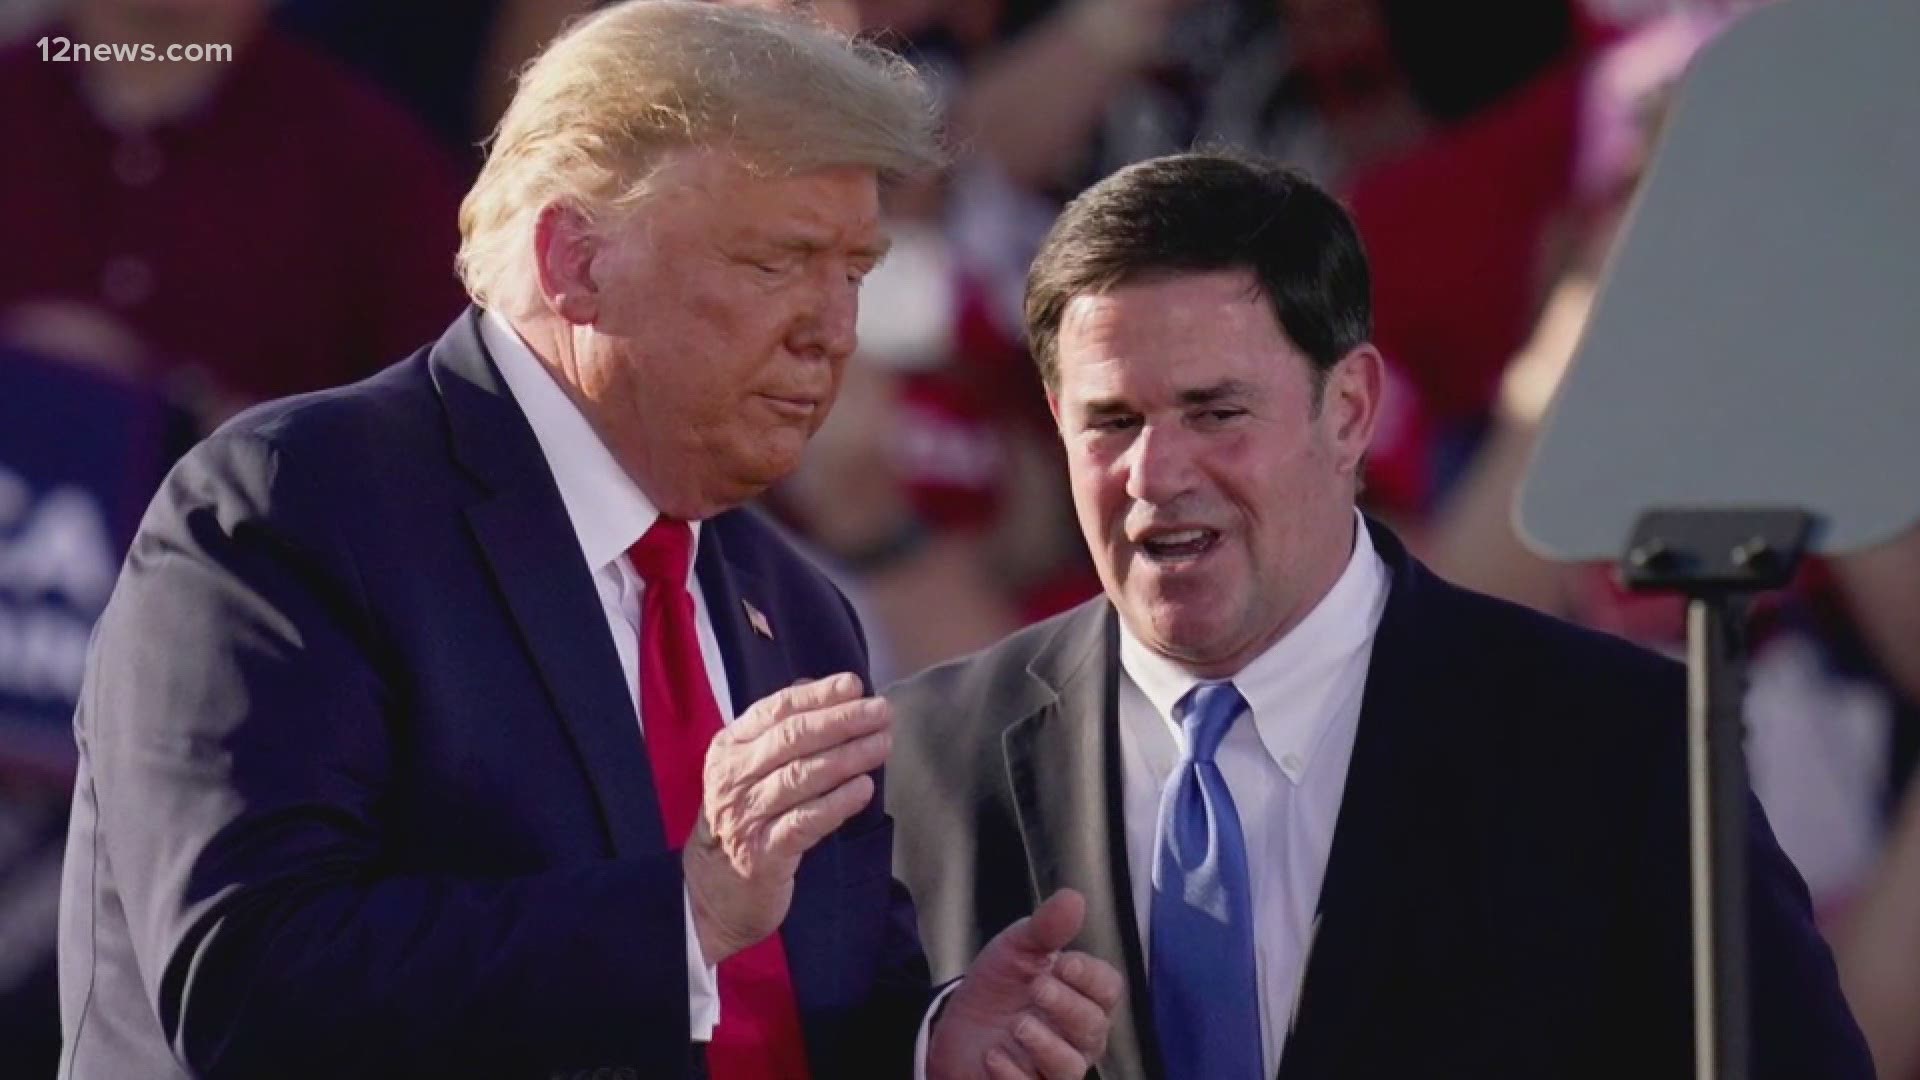 After Arizona officials, including Republican Governor Doug Ducey, certified the election in Arizona on Tuesday, President Donald Trump is not happy with Ducey.